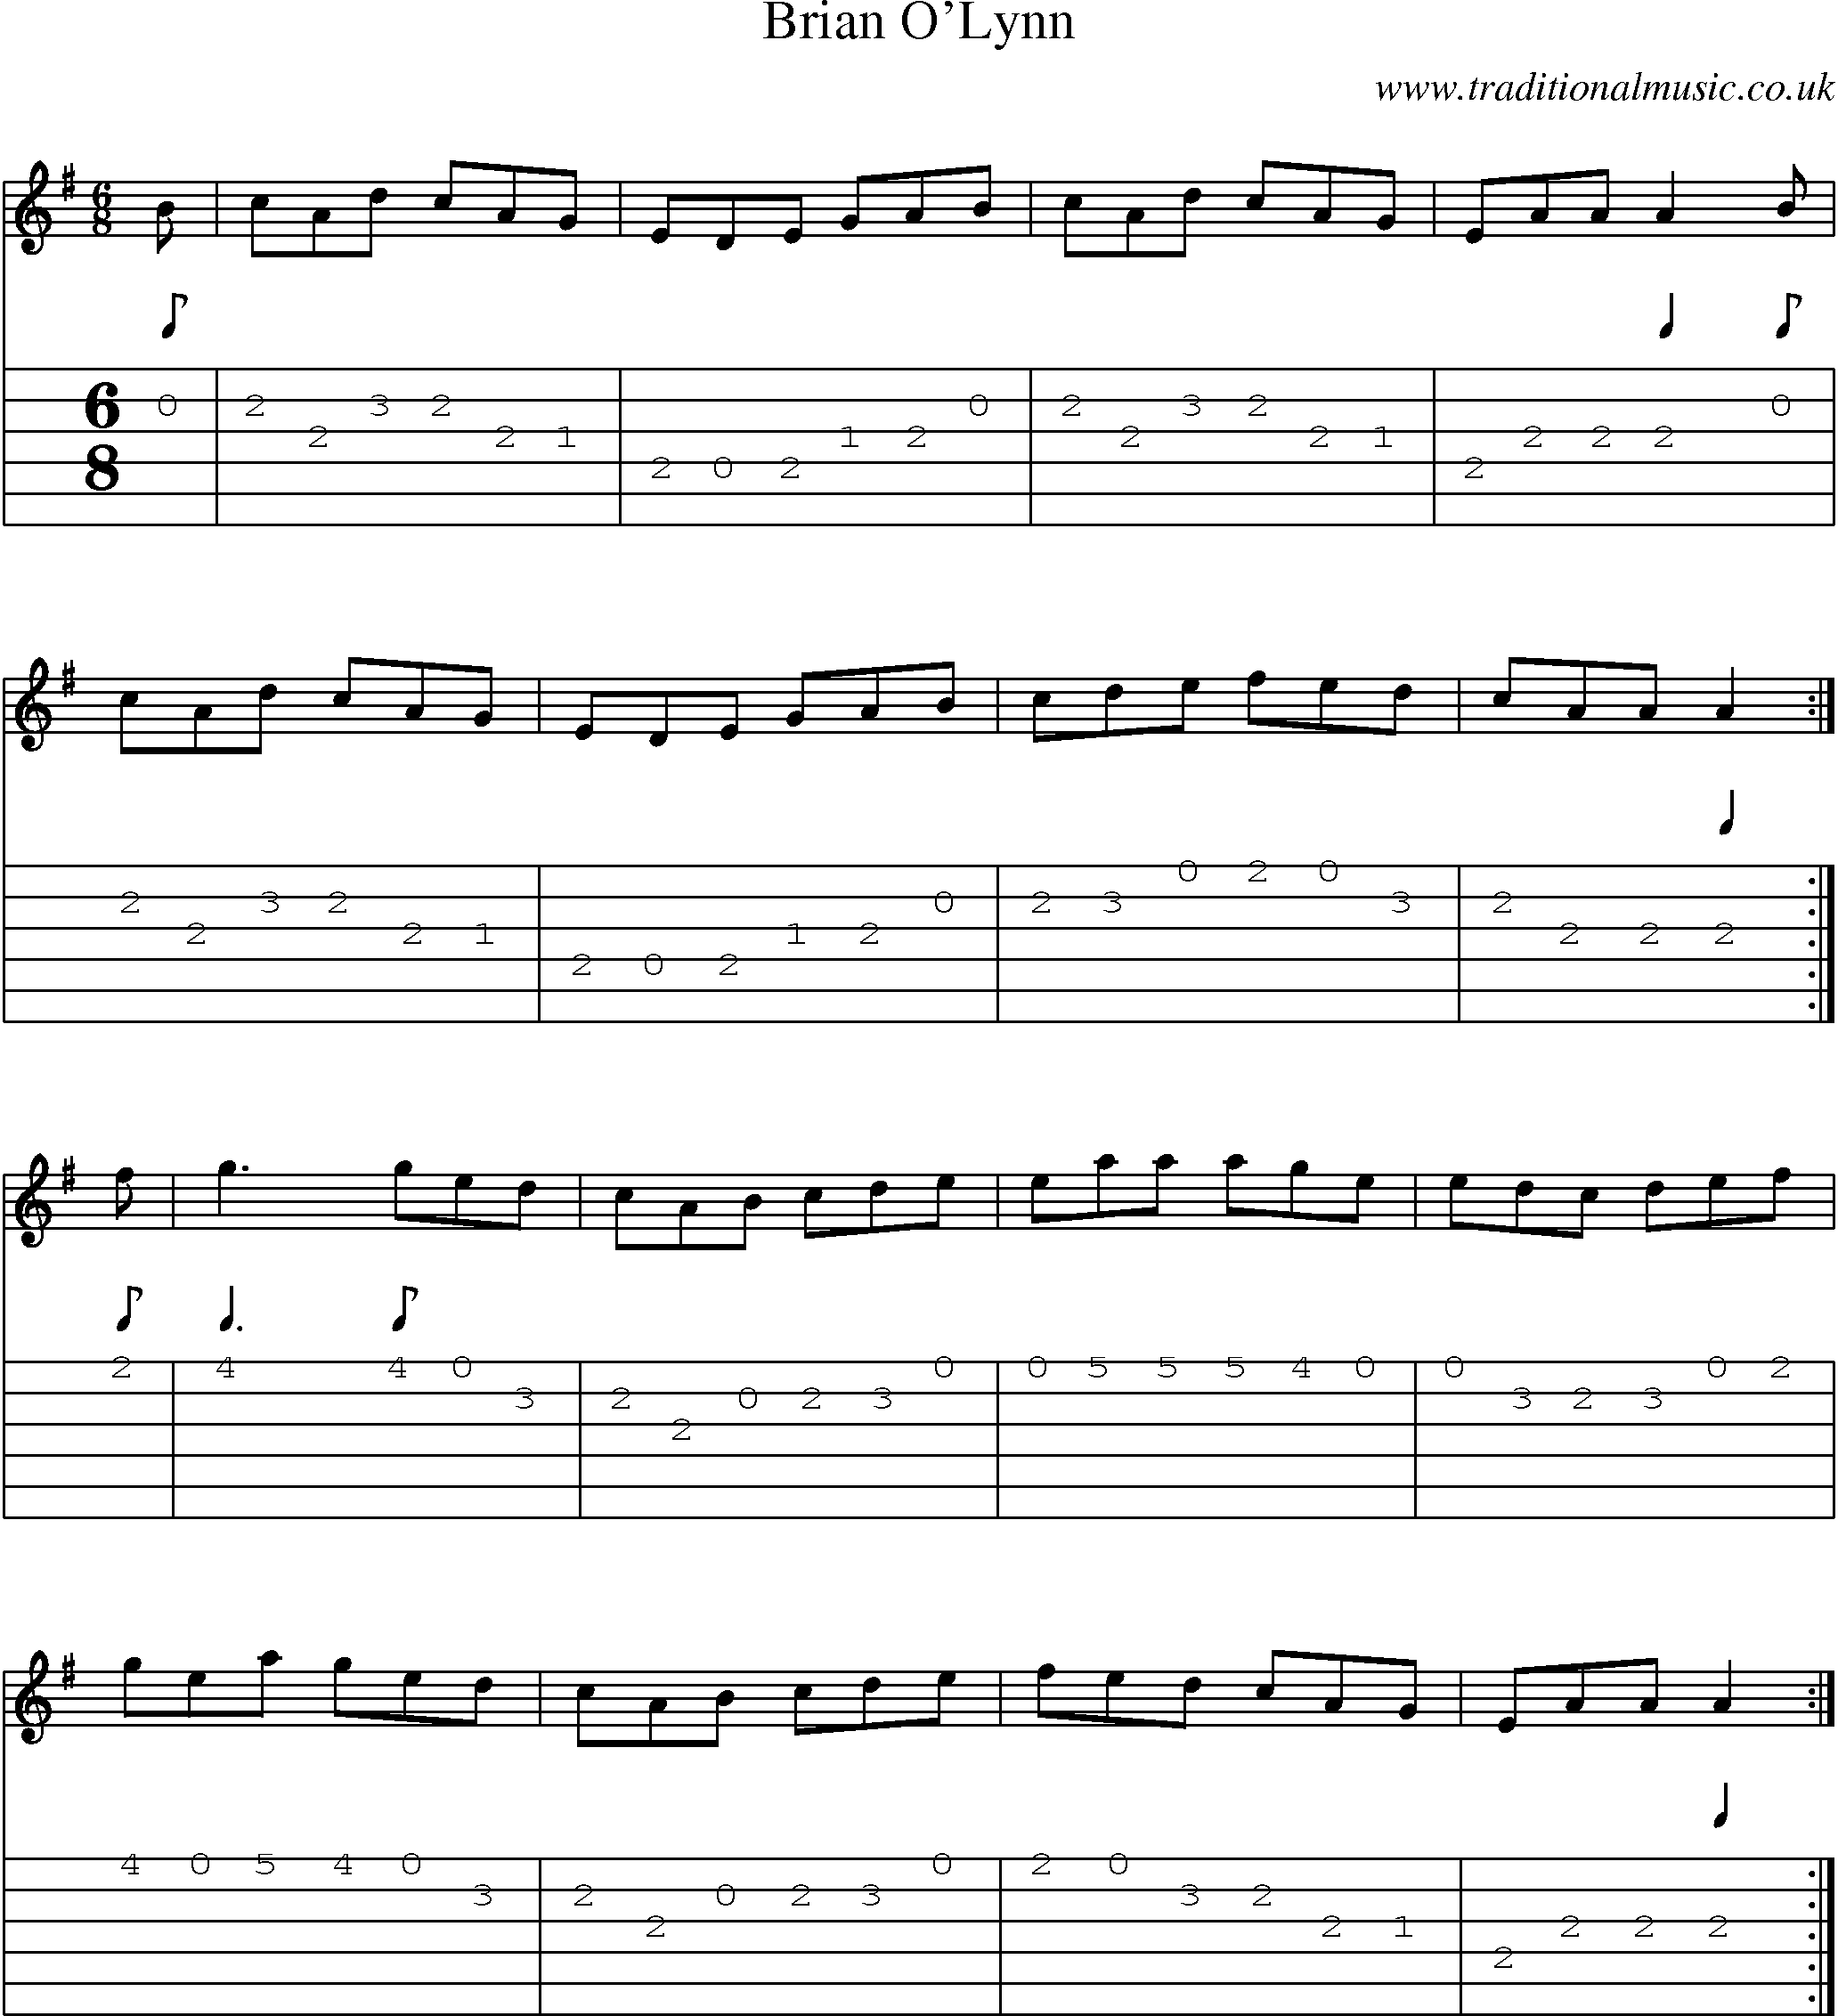 Music Score and Guitar Tabs for Brian Olynn